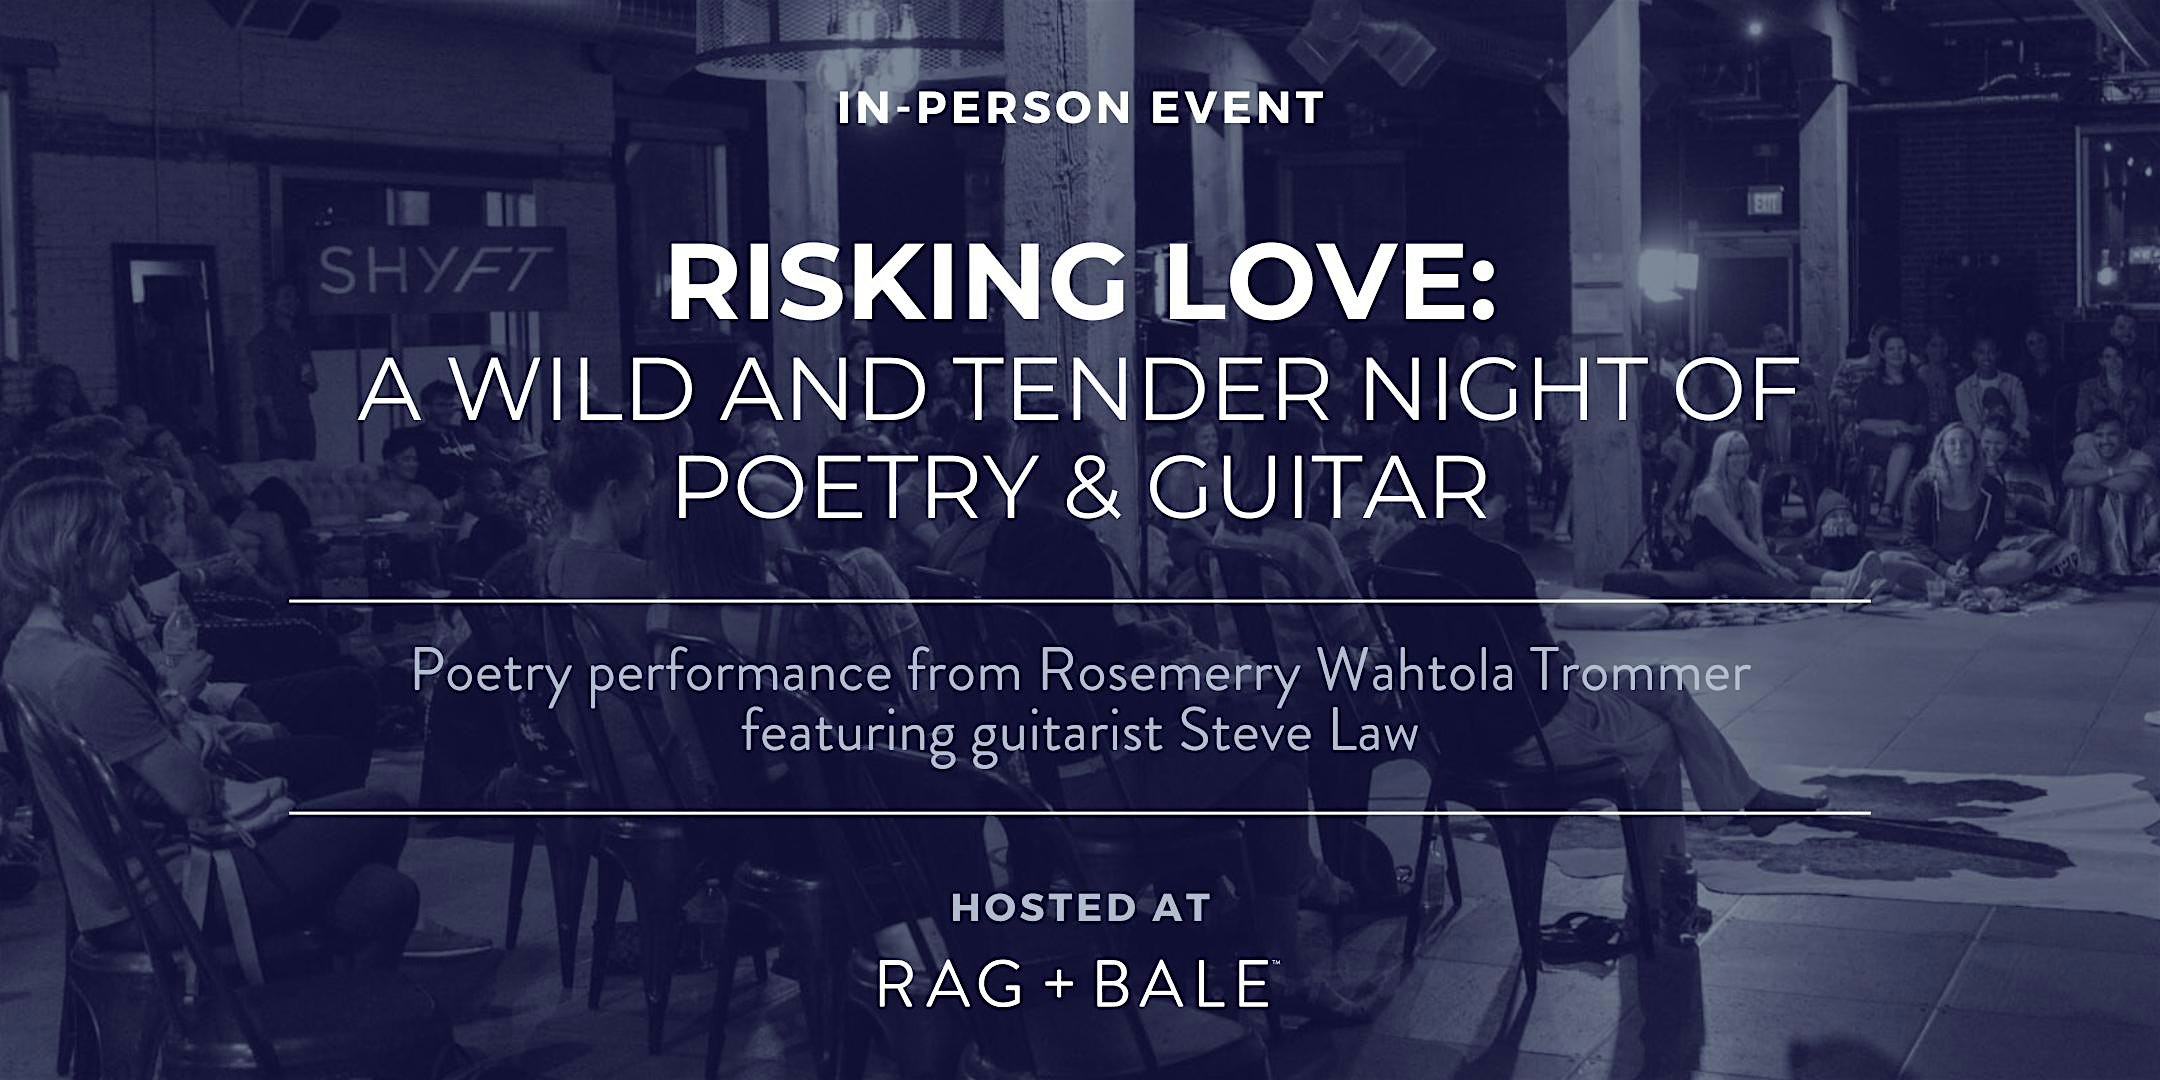 Risking Love: A Wild and Tender Night of Poetry & Guitar